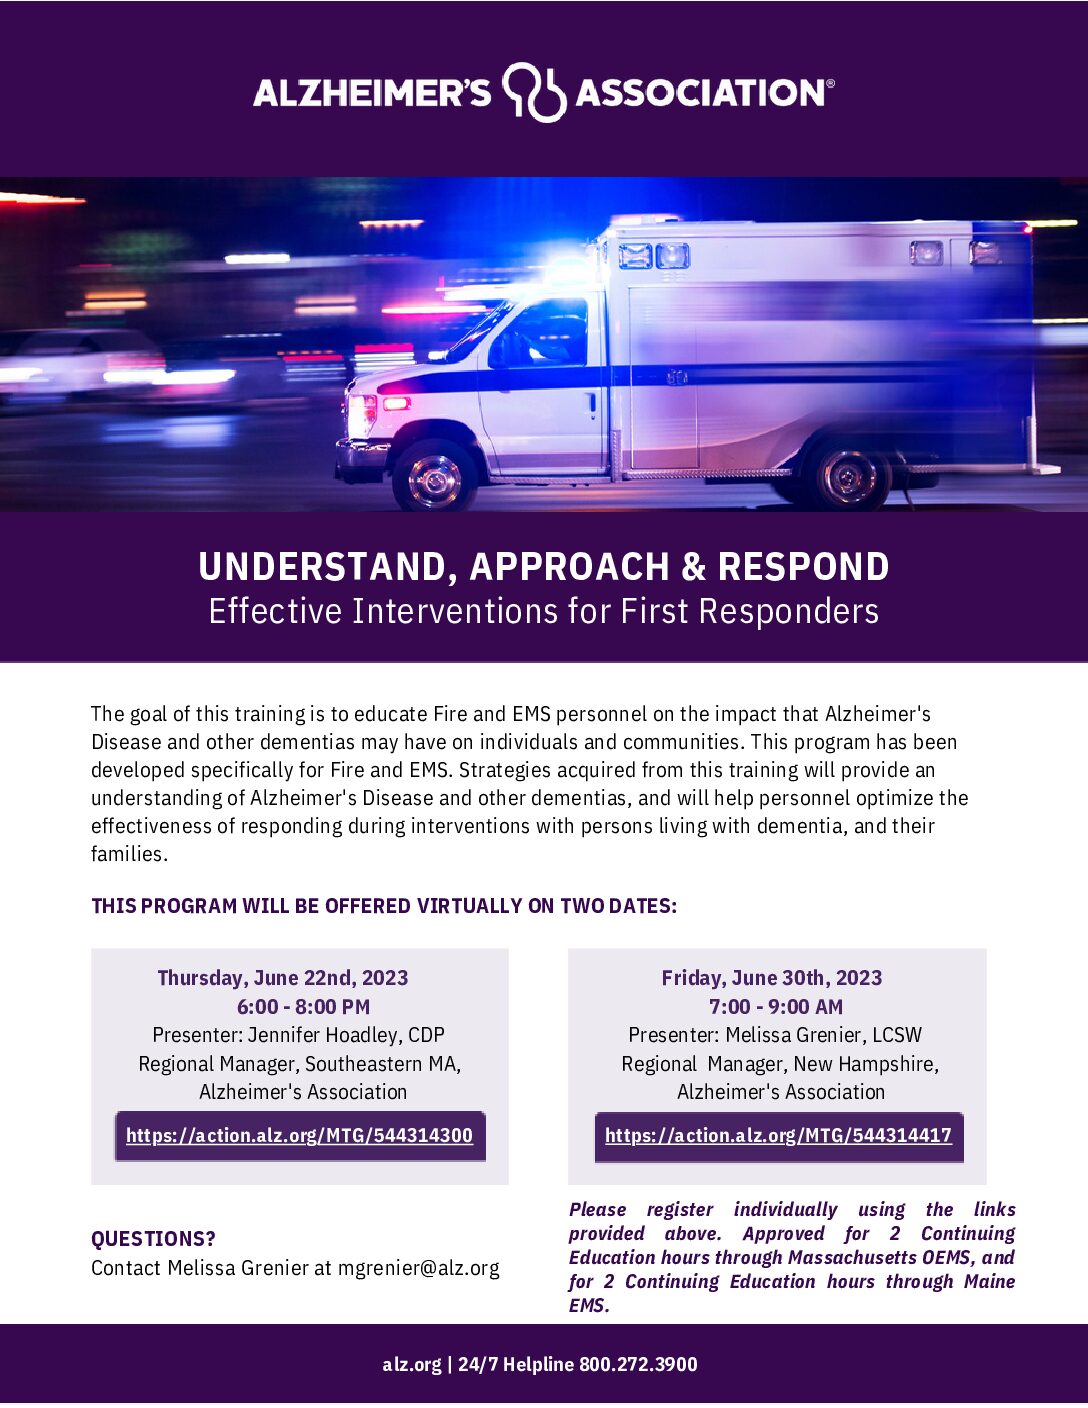 Alzheimer’s Association of MA/NH Offering Free Training for First Responders